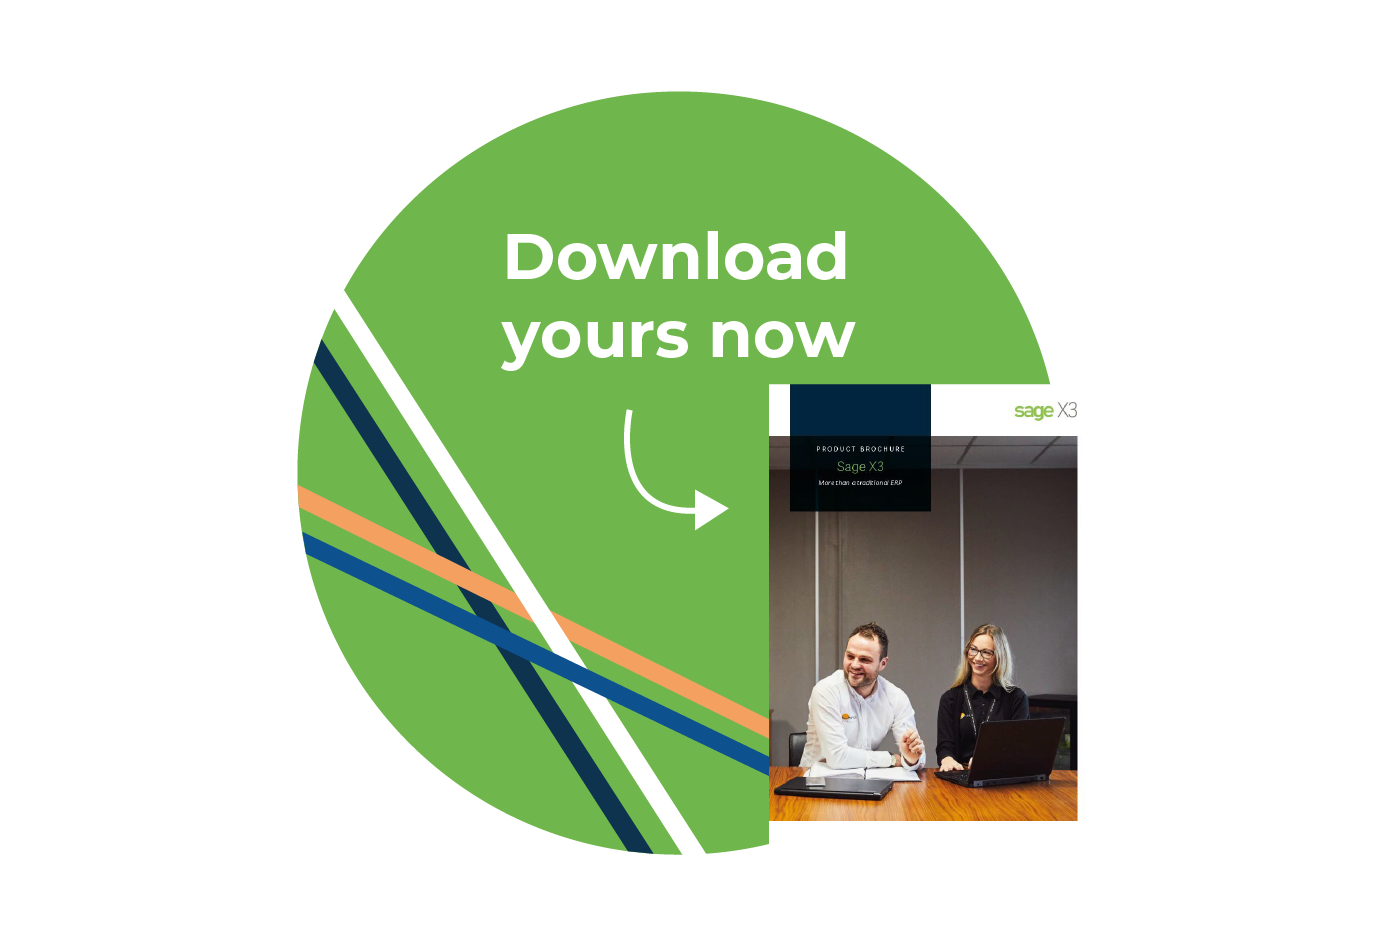 DOWNLOAD YOUR SAGE X3 PRODUCT BROCHURE